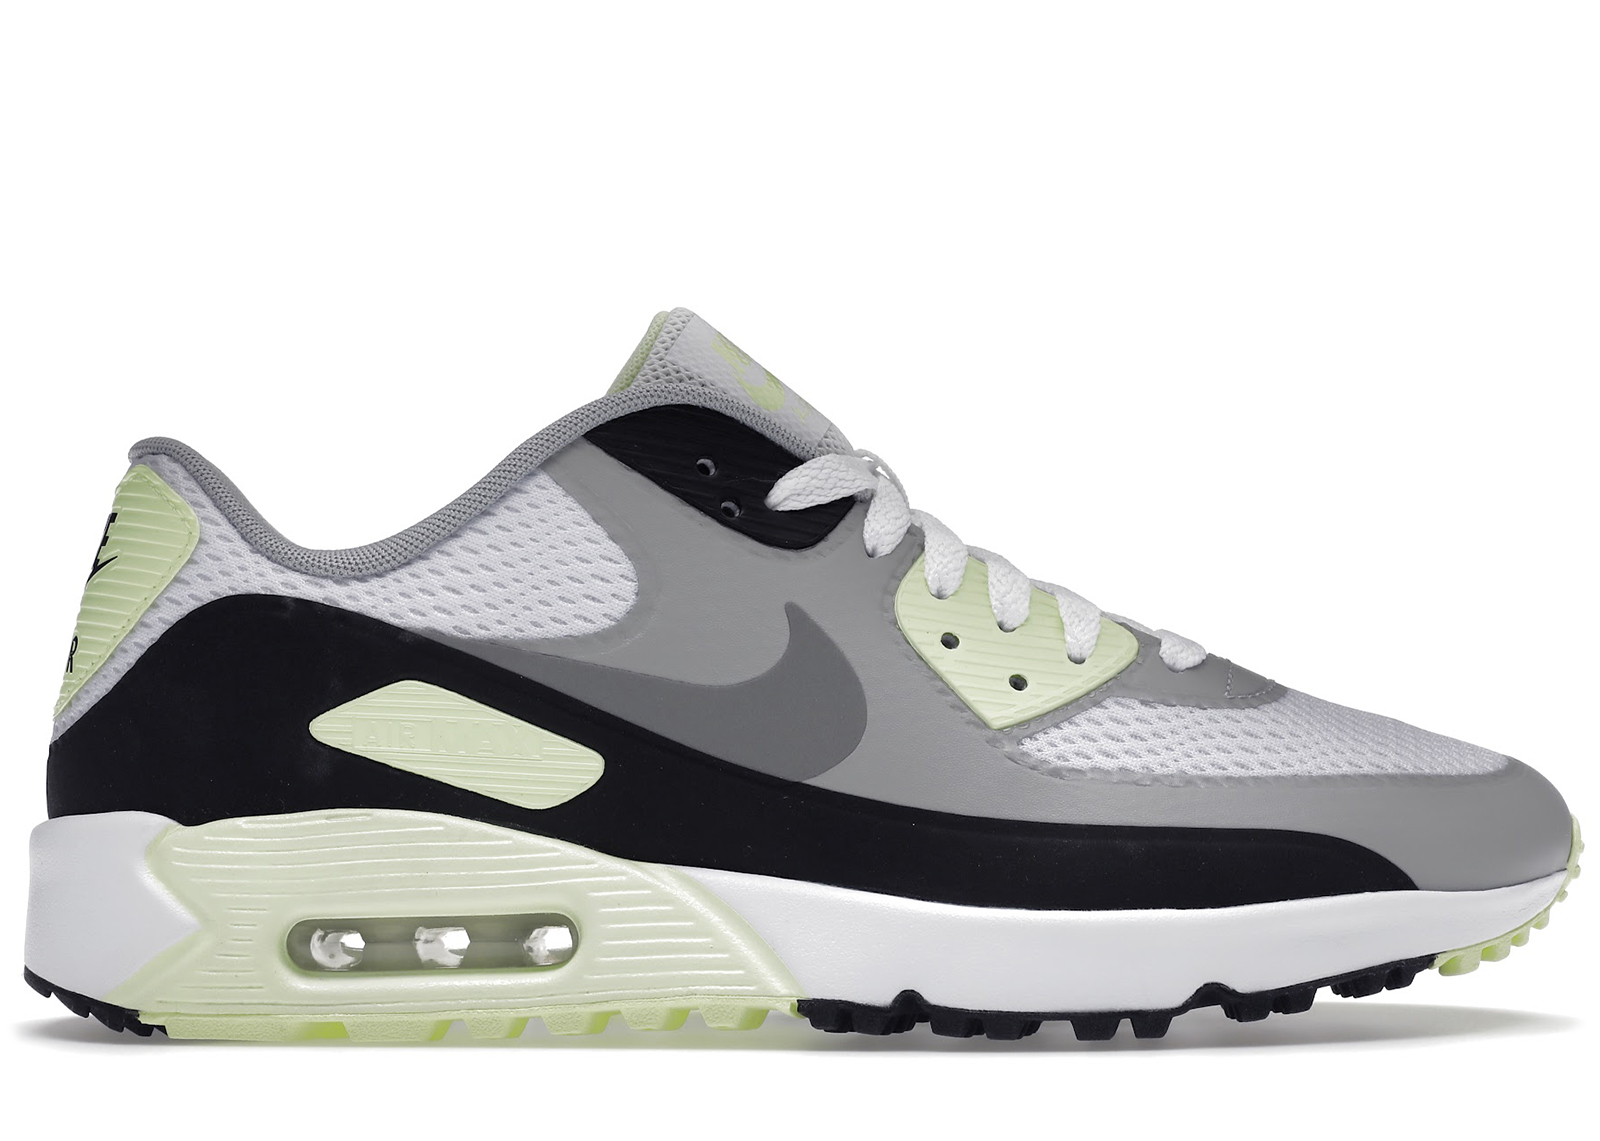 Nike Air Max 90 Golf White Particle Grey Barely Volt Men's